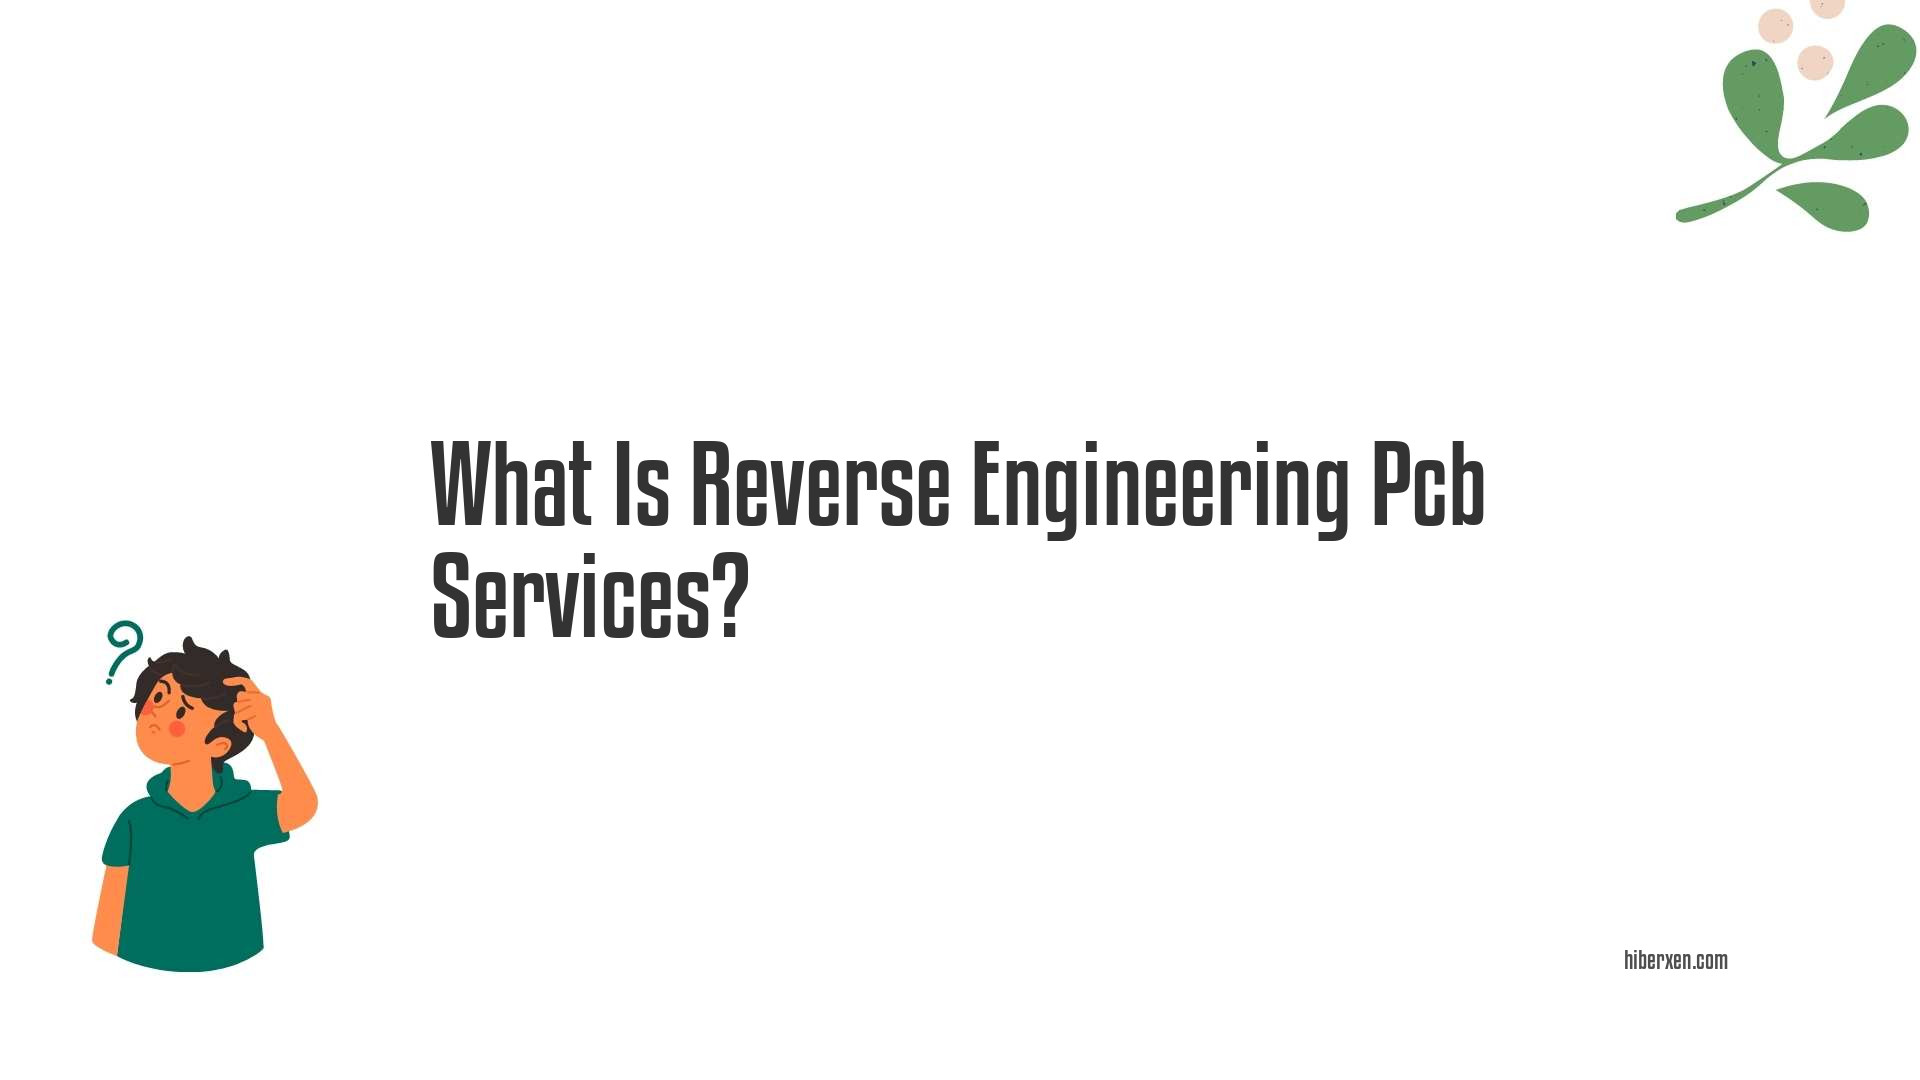 What Is Reverse Engineering Pcb Services?